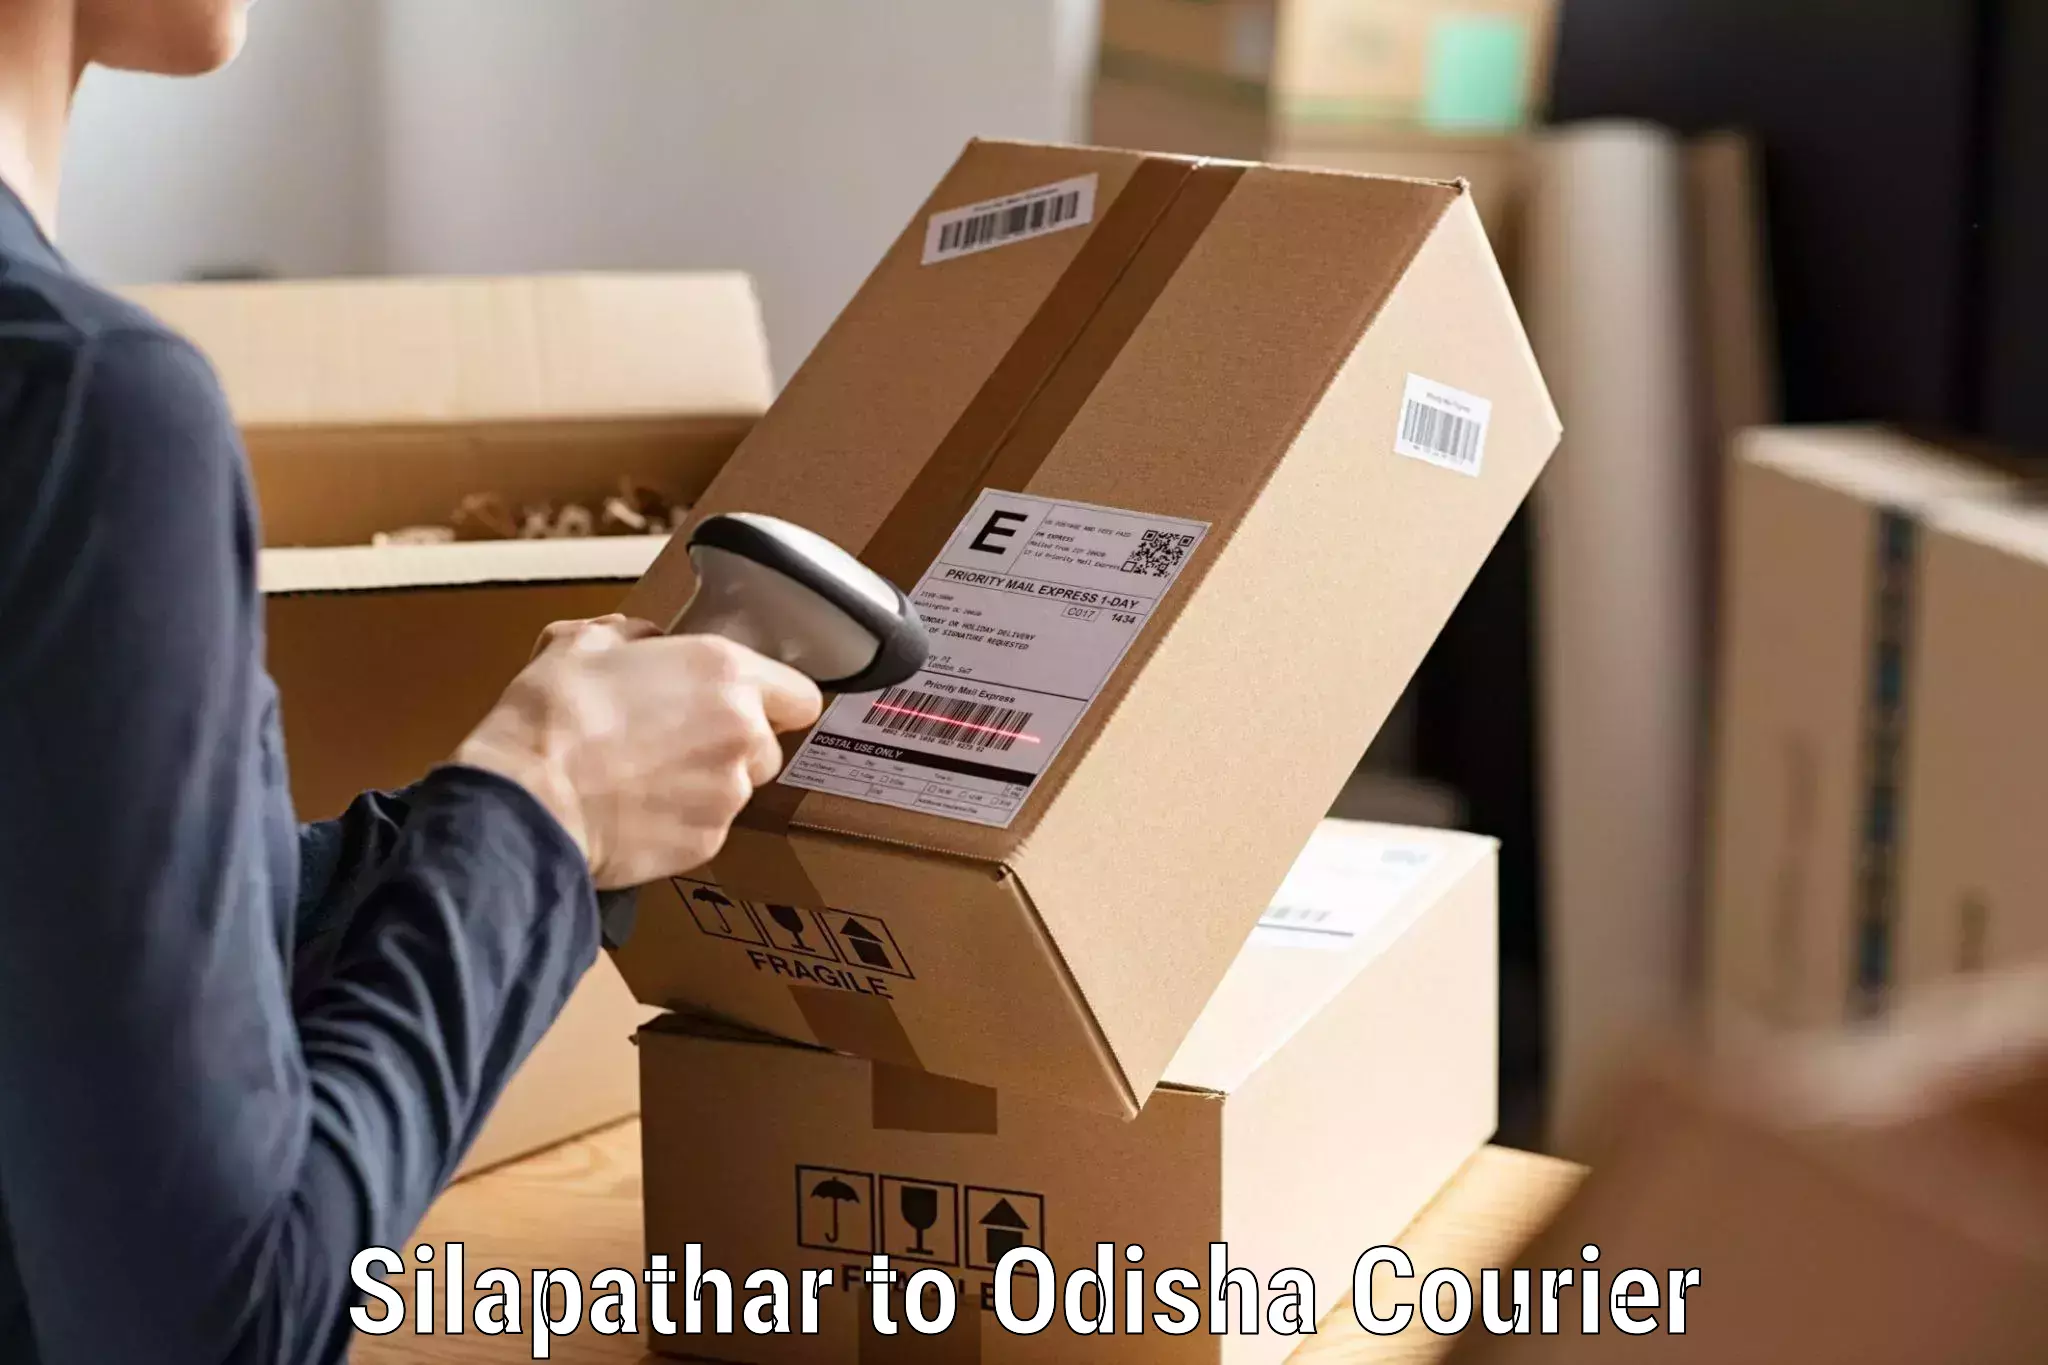 Nationwide parcel services Silapathar to Sohela